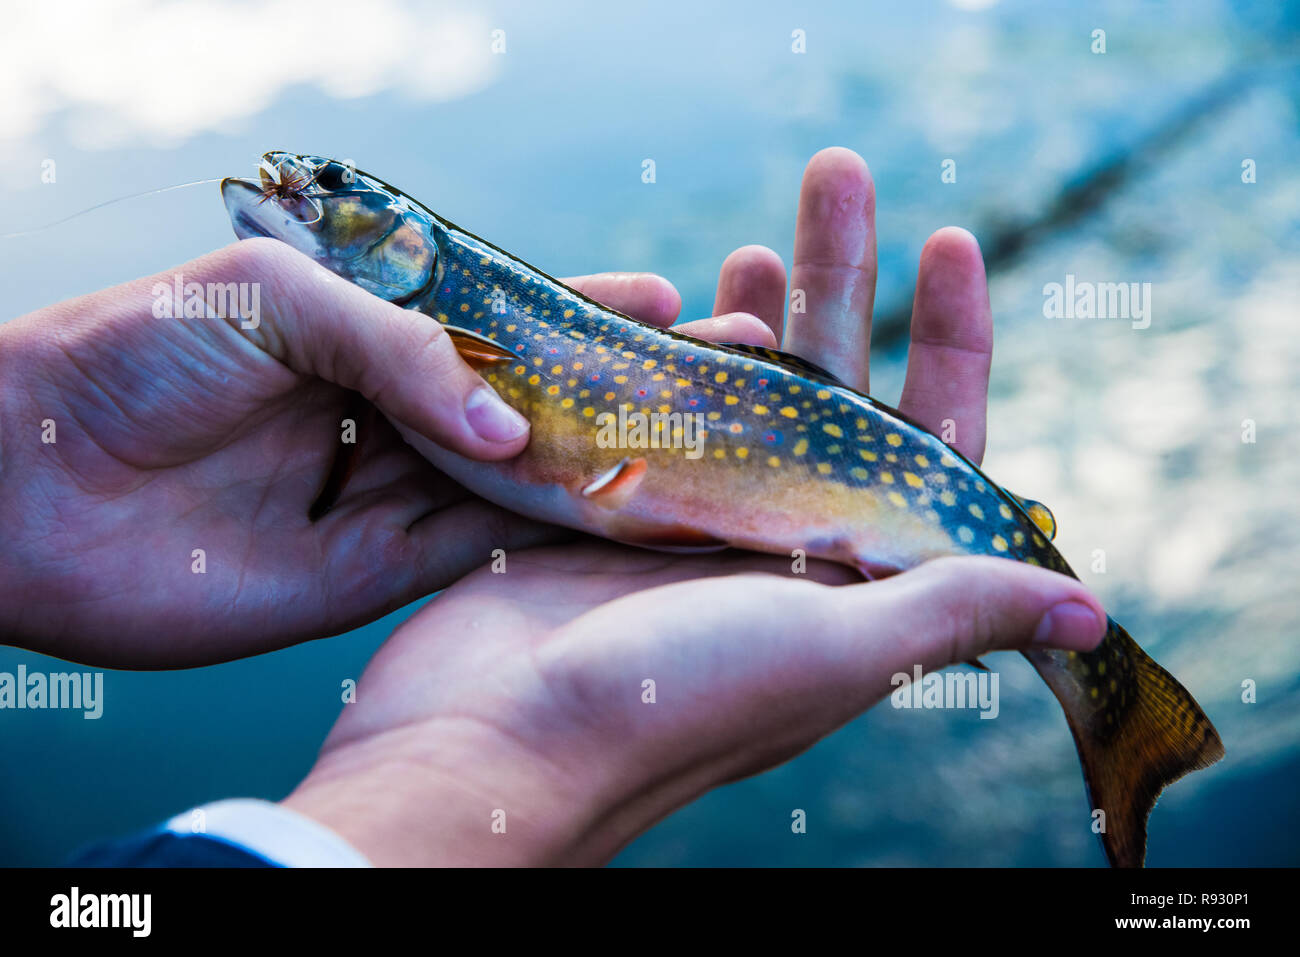 A young boys hands holding a beautiful Brook Trout. Stock Photo